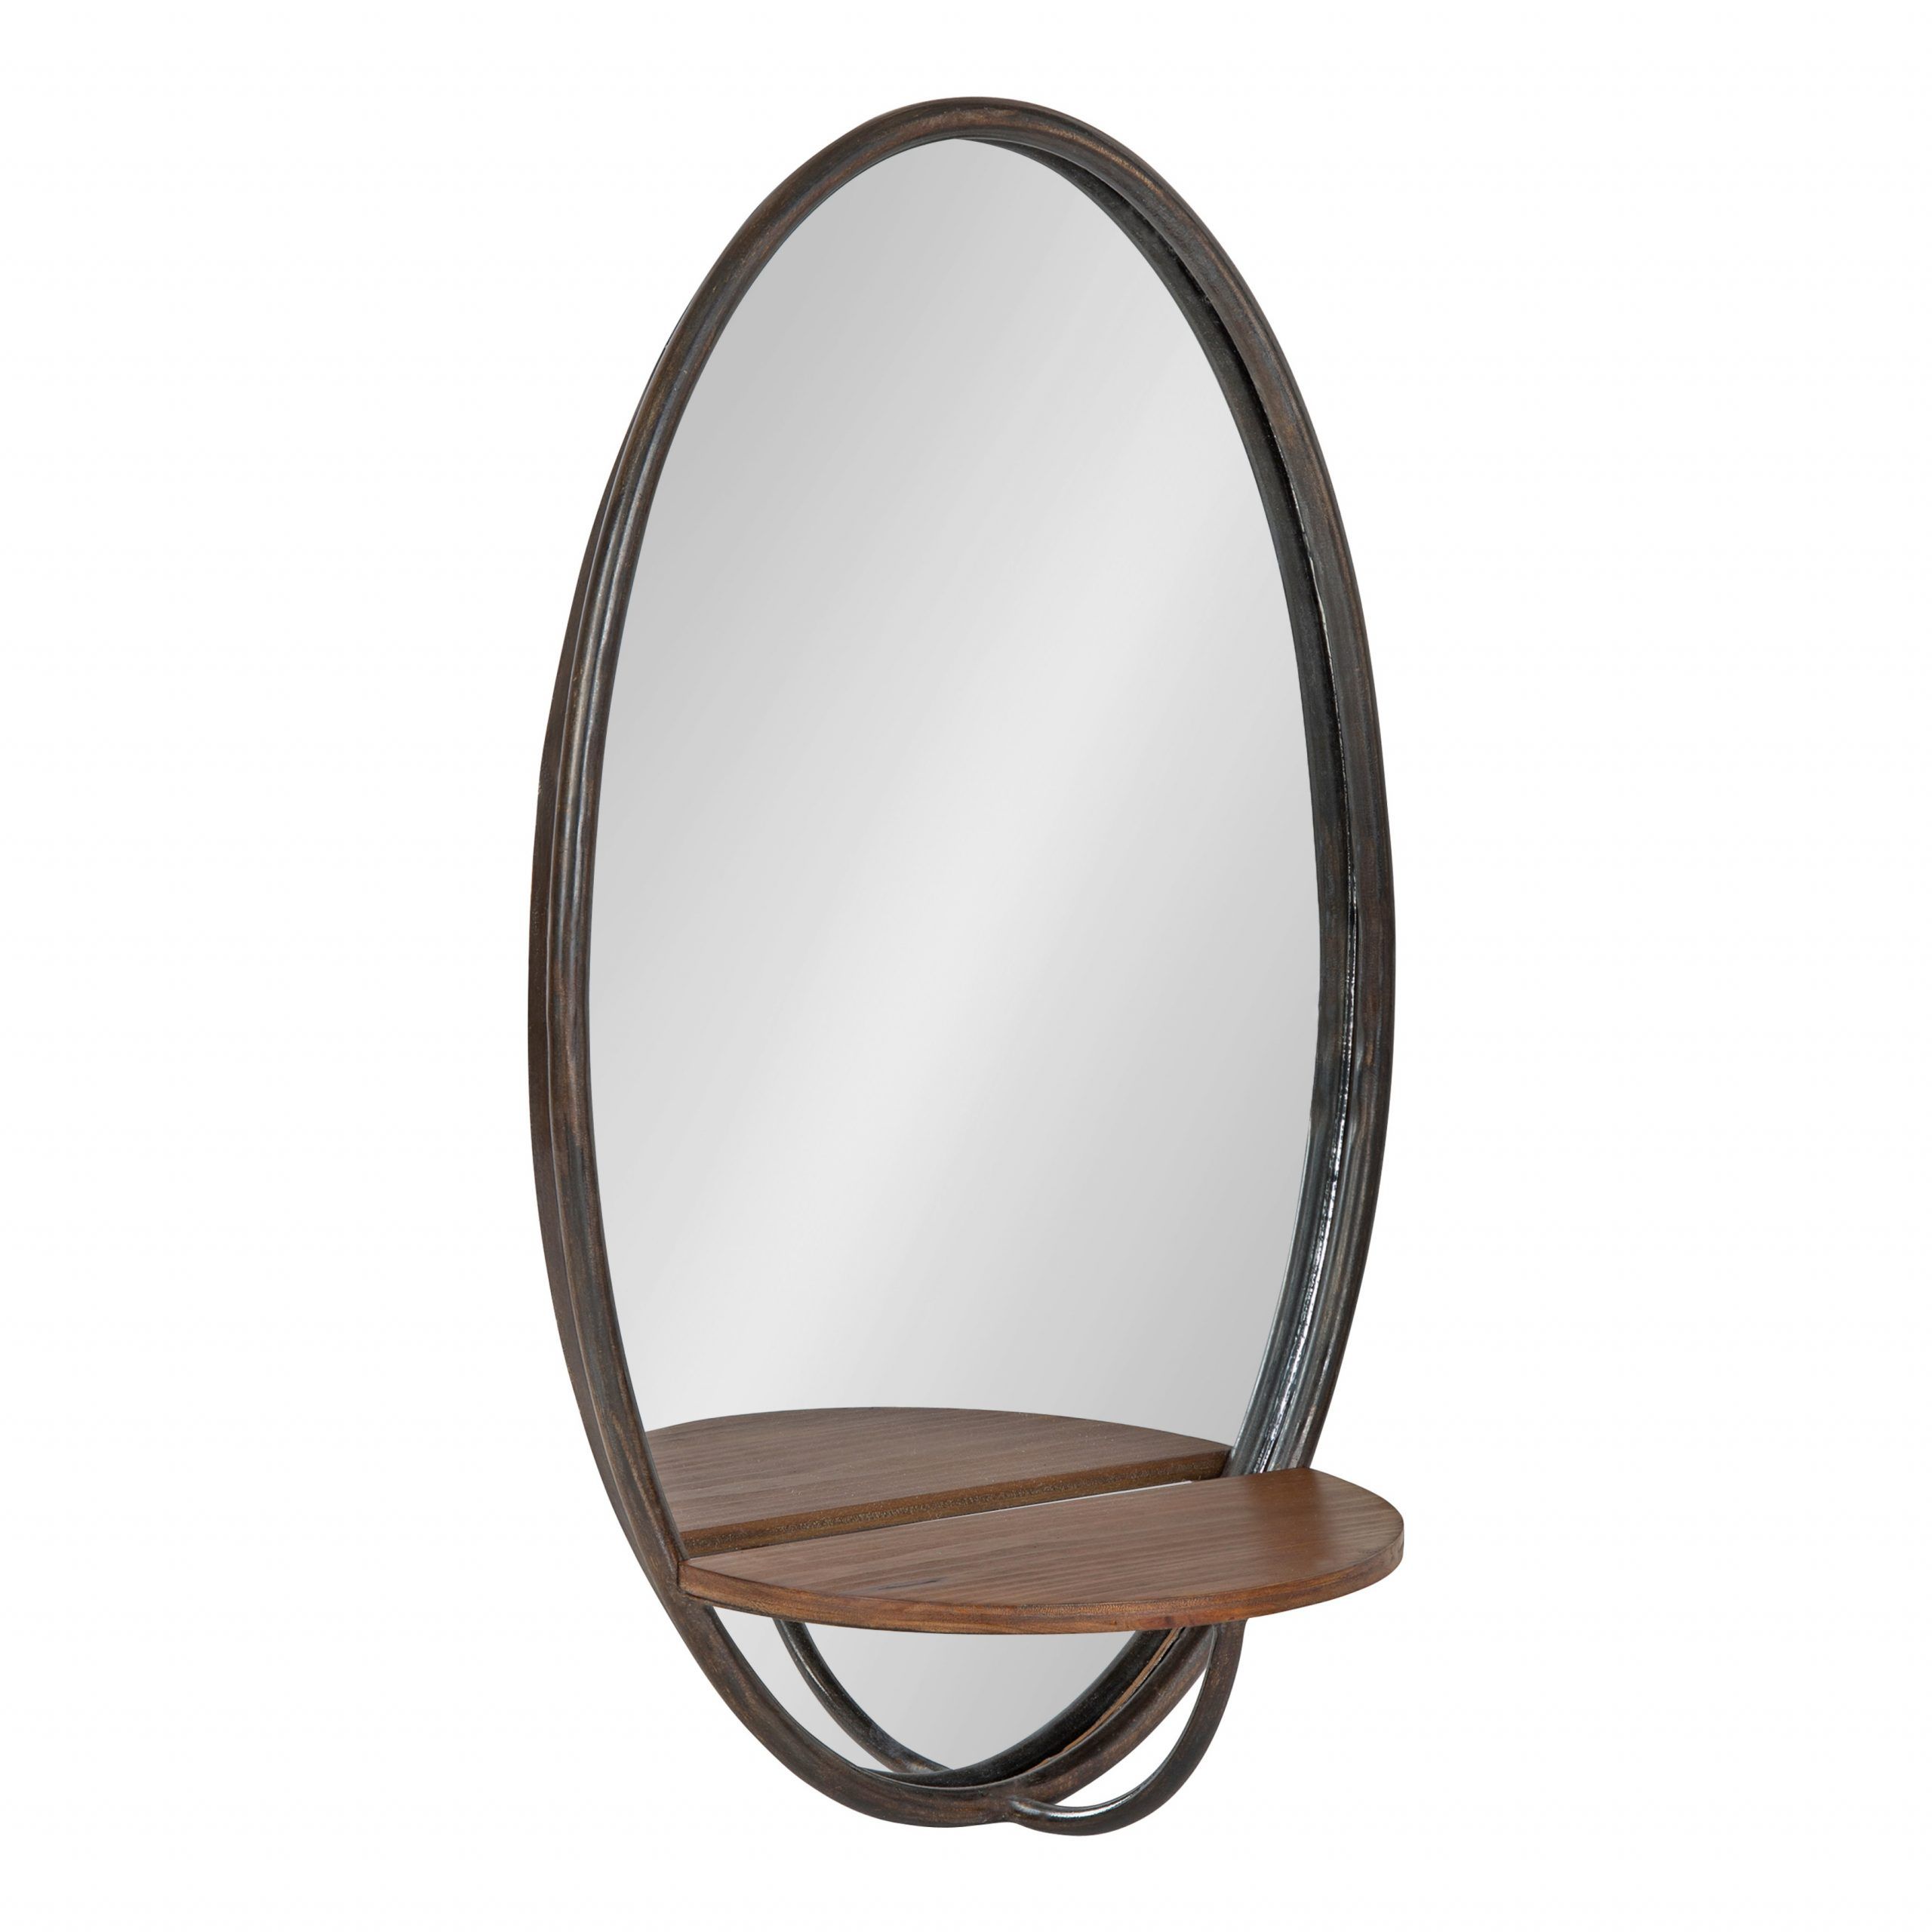 Kate And Laurel Gita Rustic Oval Wall Mirror With Shelf, 15" X 24 Pertaining To Wooden Oval Wall Mirrors (View 5 of 15)